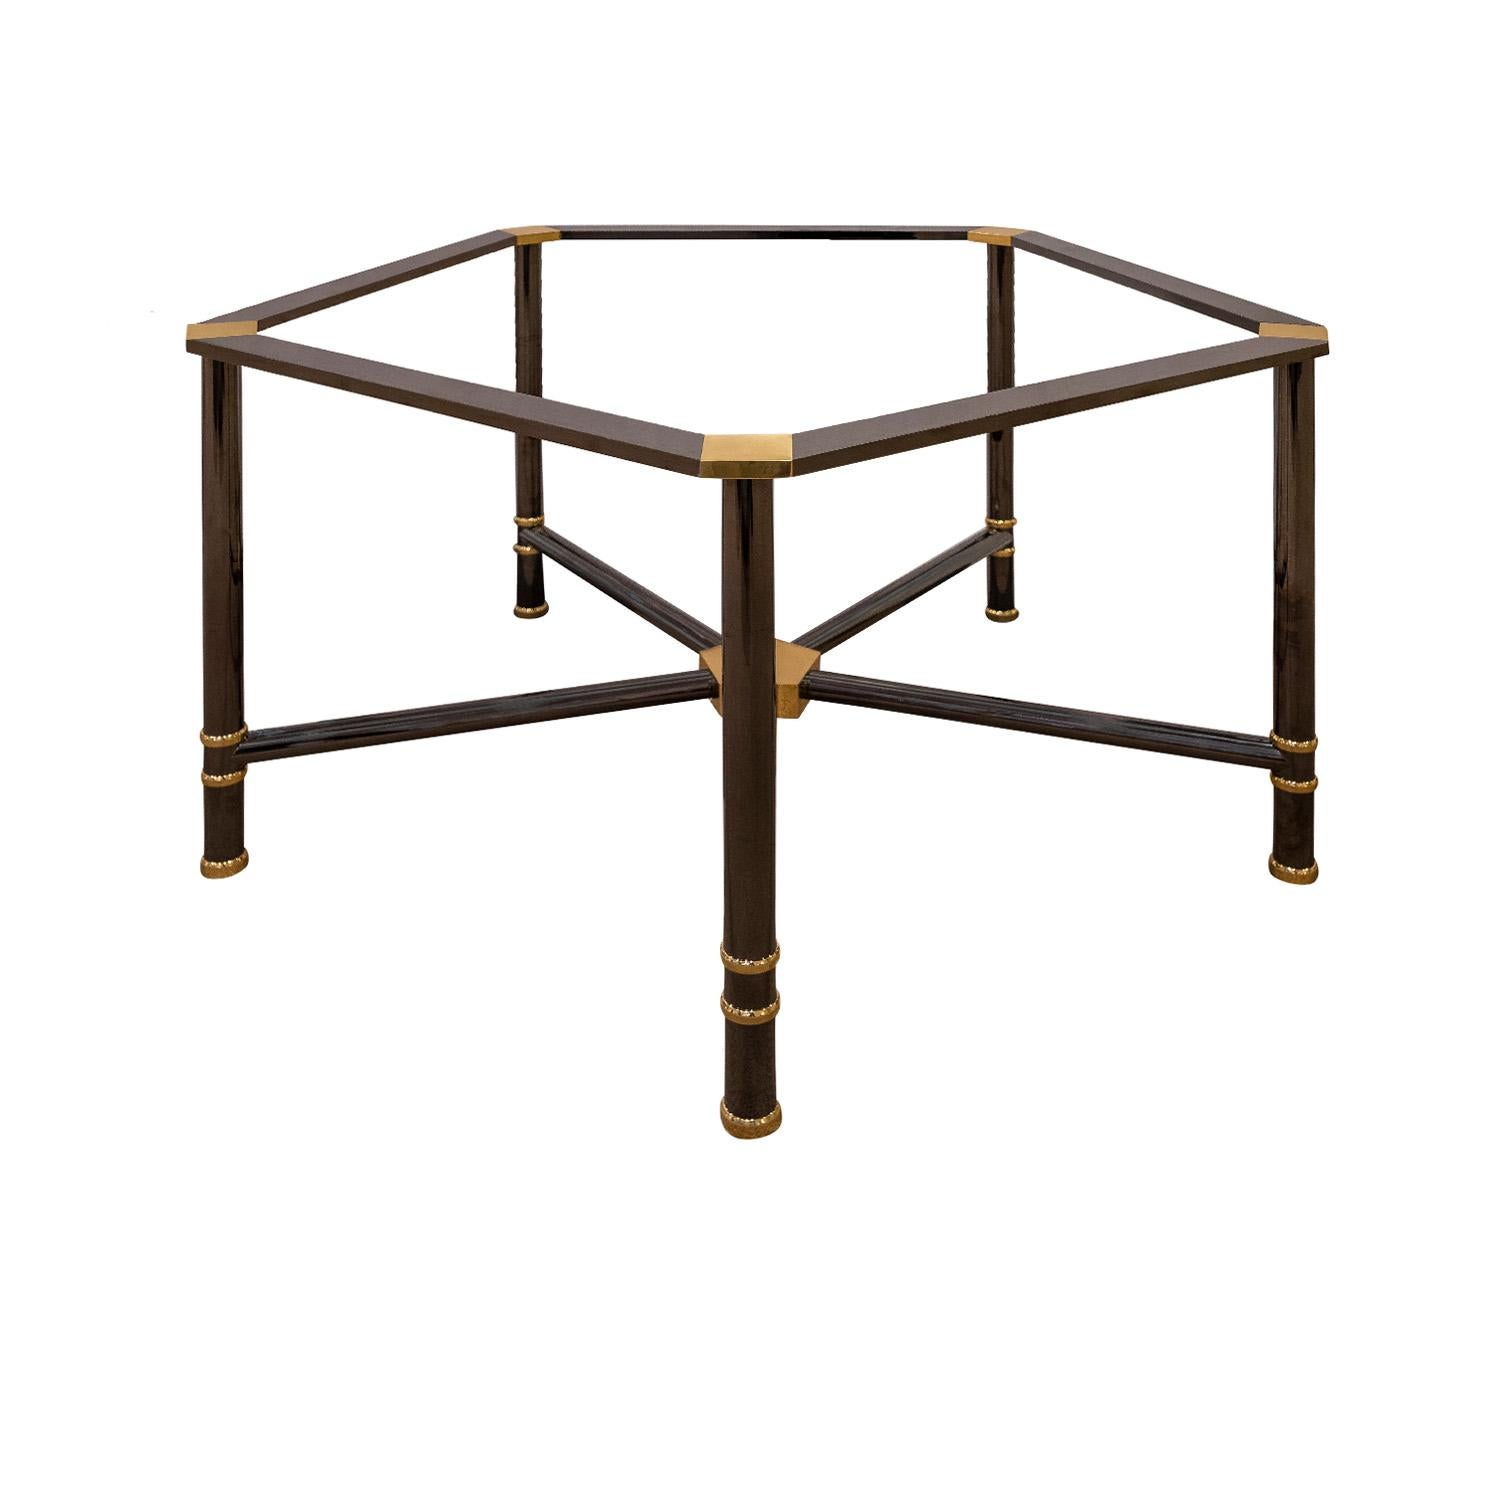 American Karl Springer Rare Jansen Style Table in Polished Gunmetal and Brass 1980s For Sale